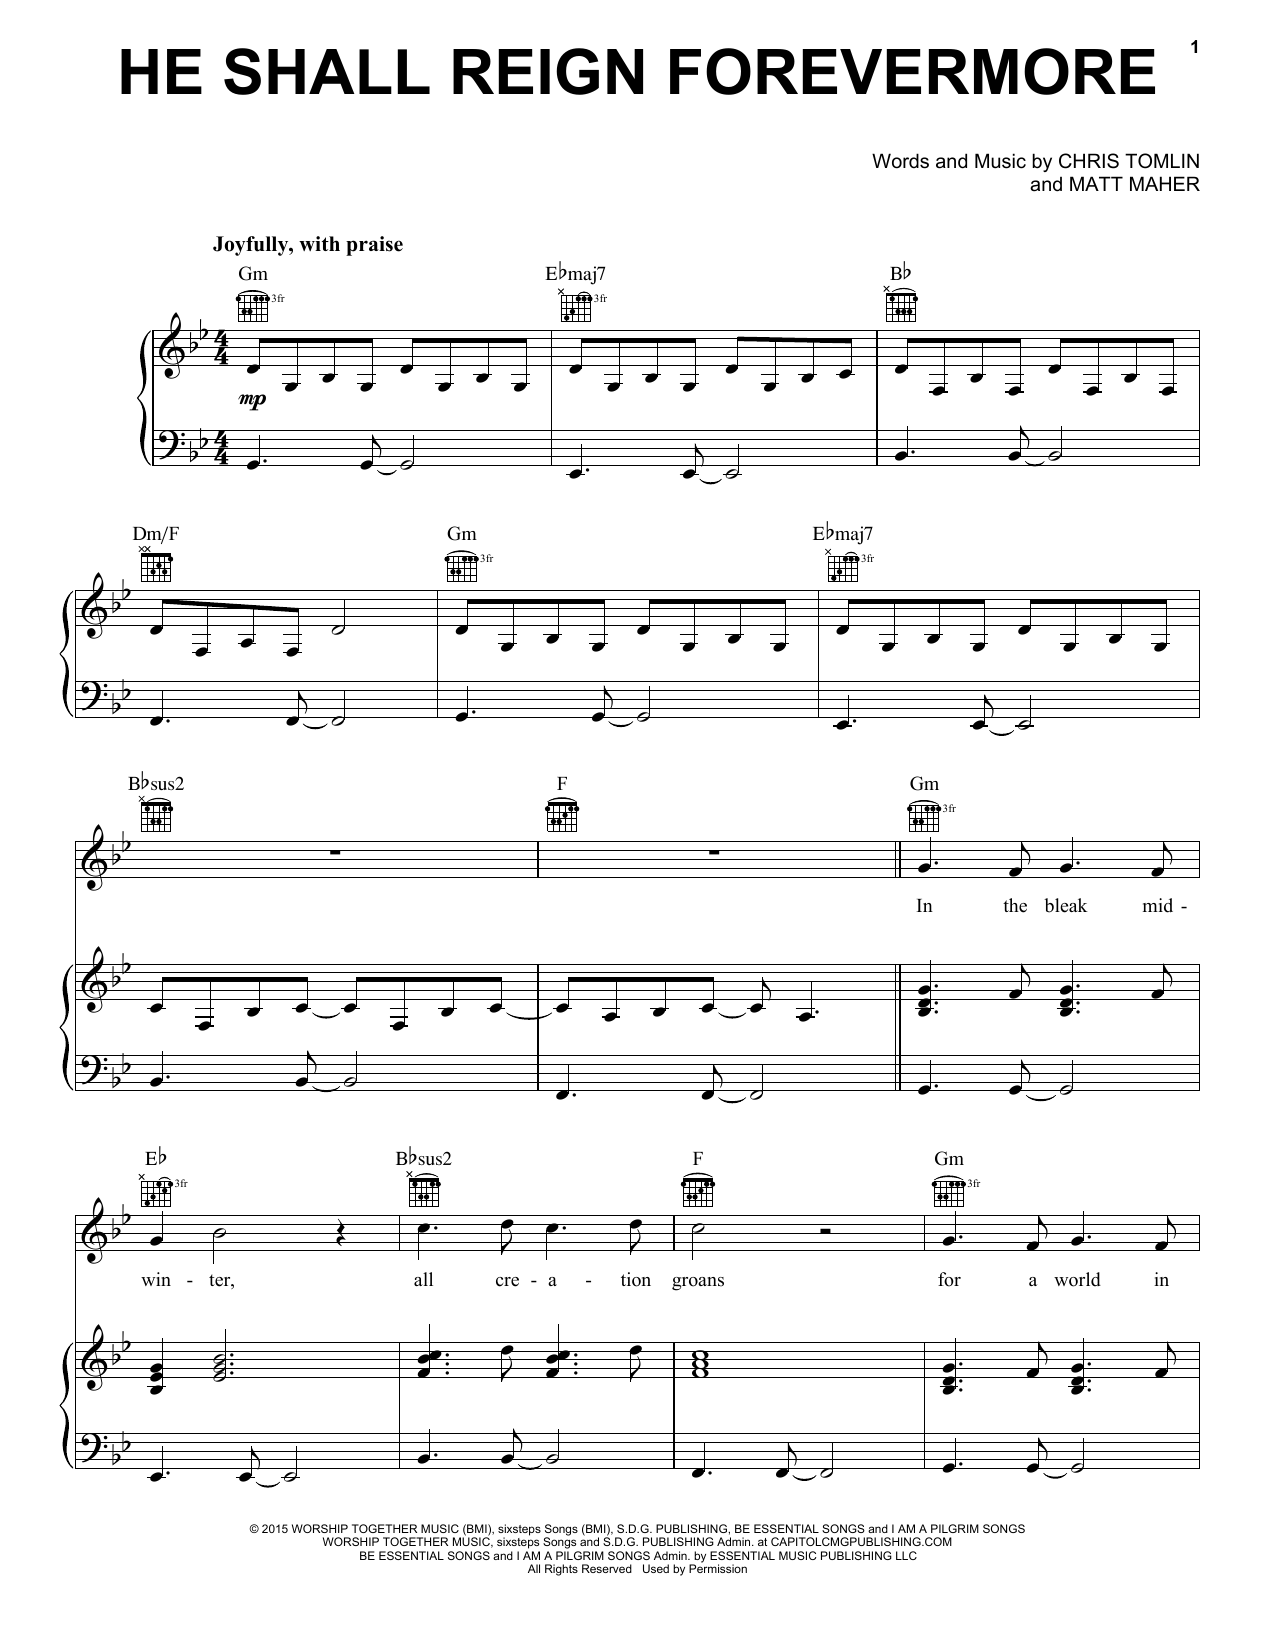 Download Chris Tomlin He Shall Reign Forevermore Sheet Music